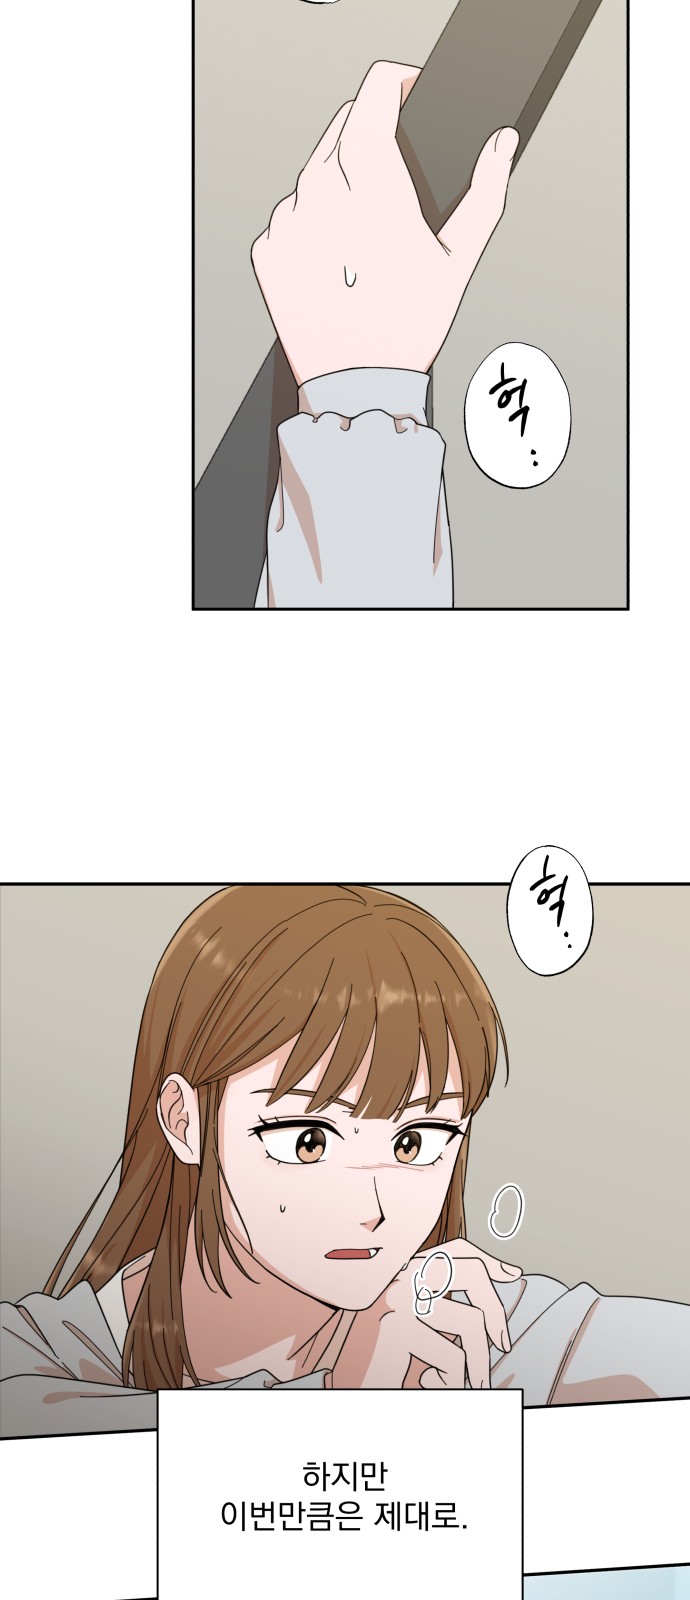 The Man With Pretty Lips - Chapter 3 - Page 55